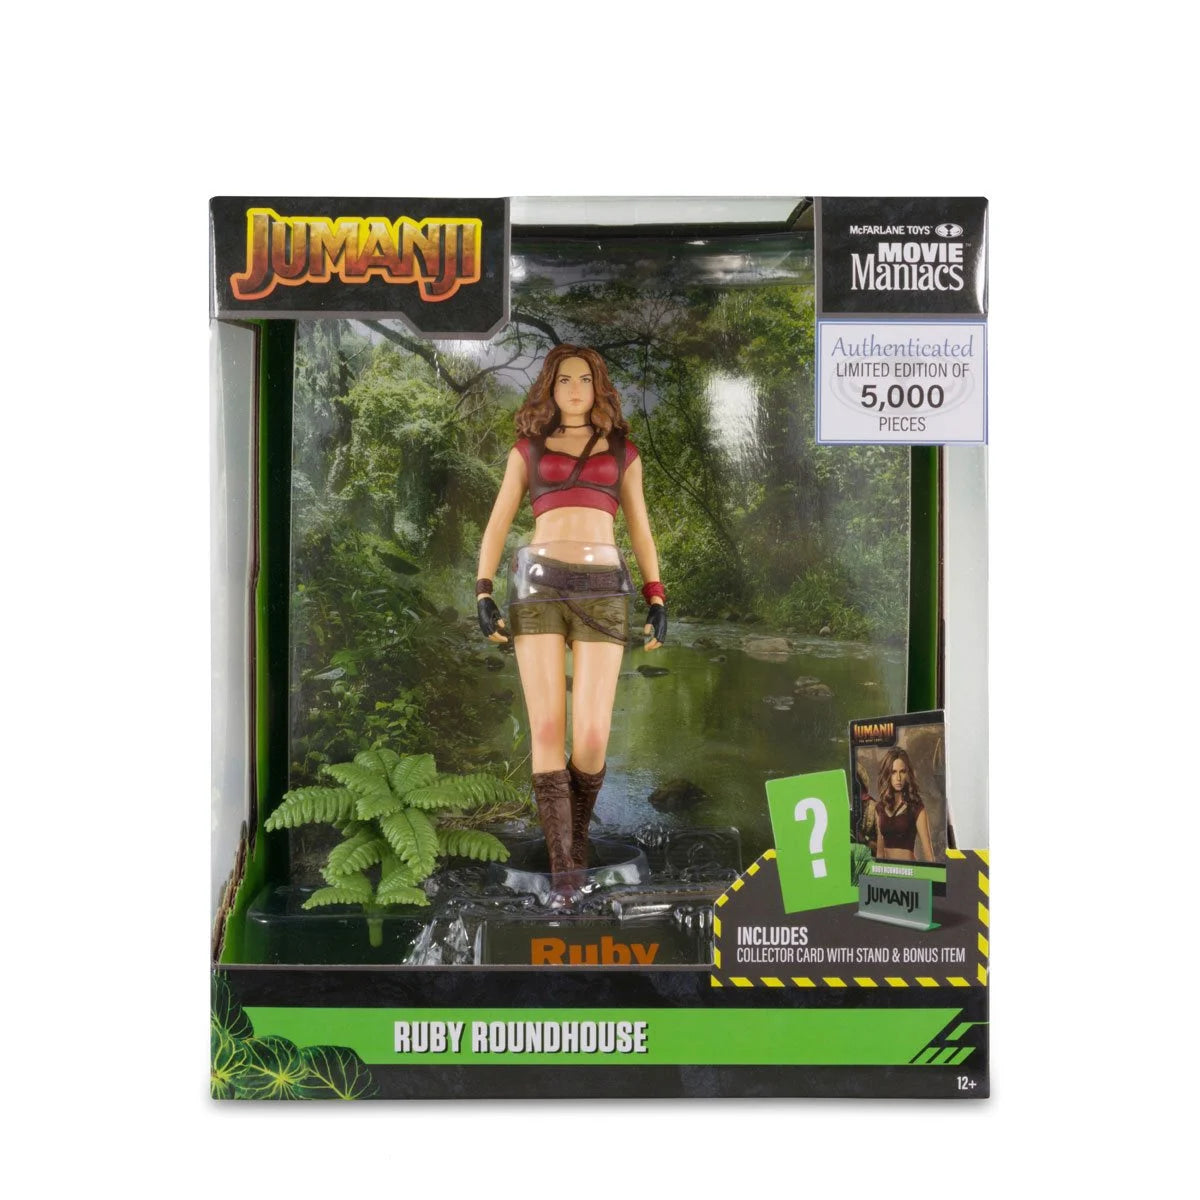 Movie Maniacs Wave 4 Jumanji Ruby Roundhouse Limited Edition 6-Inch Scale Posed Figure in a package - Heretoserveyou